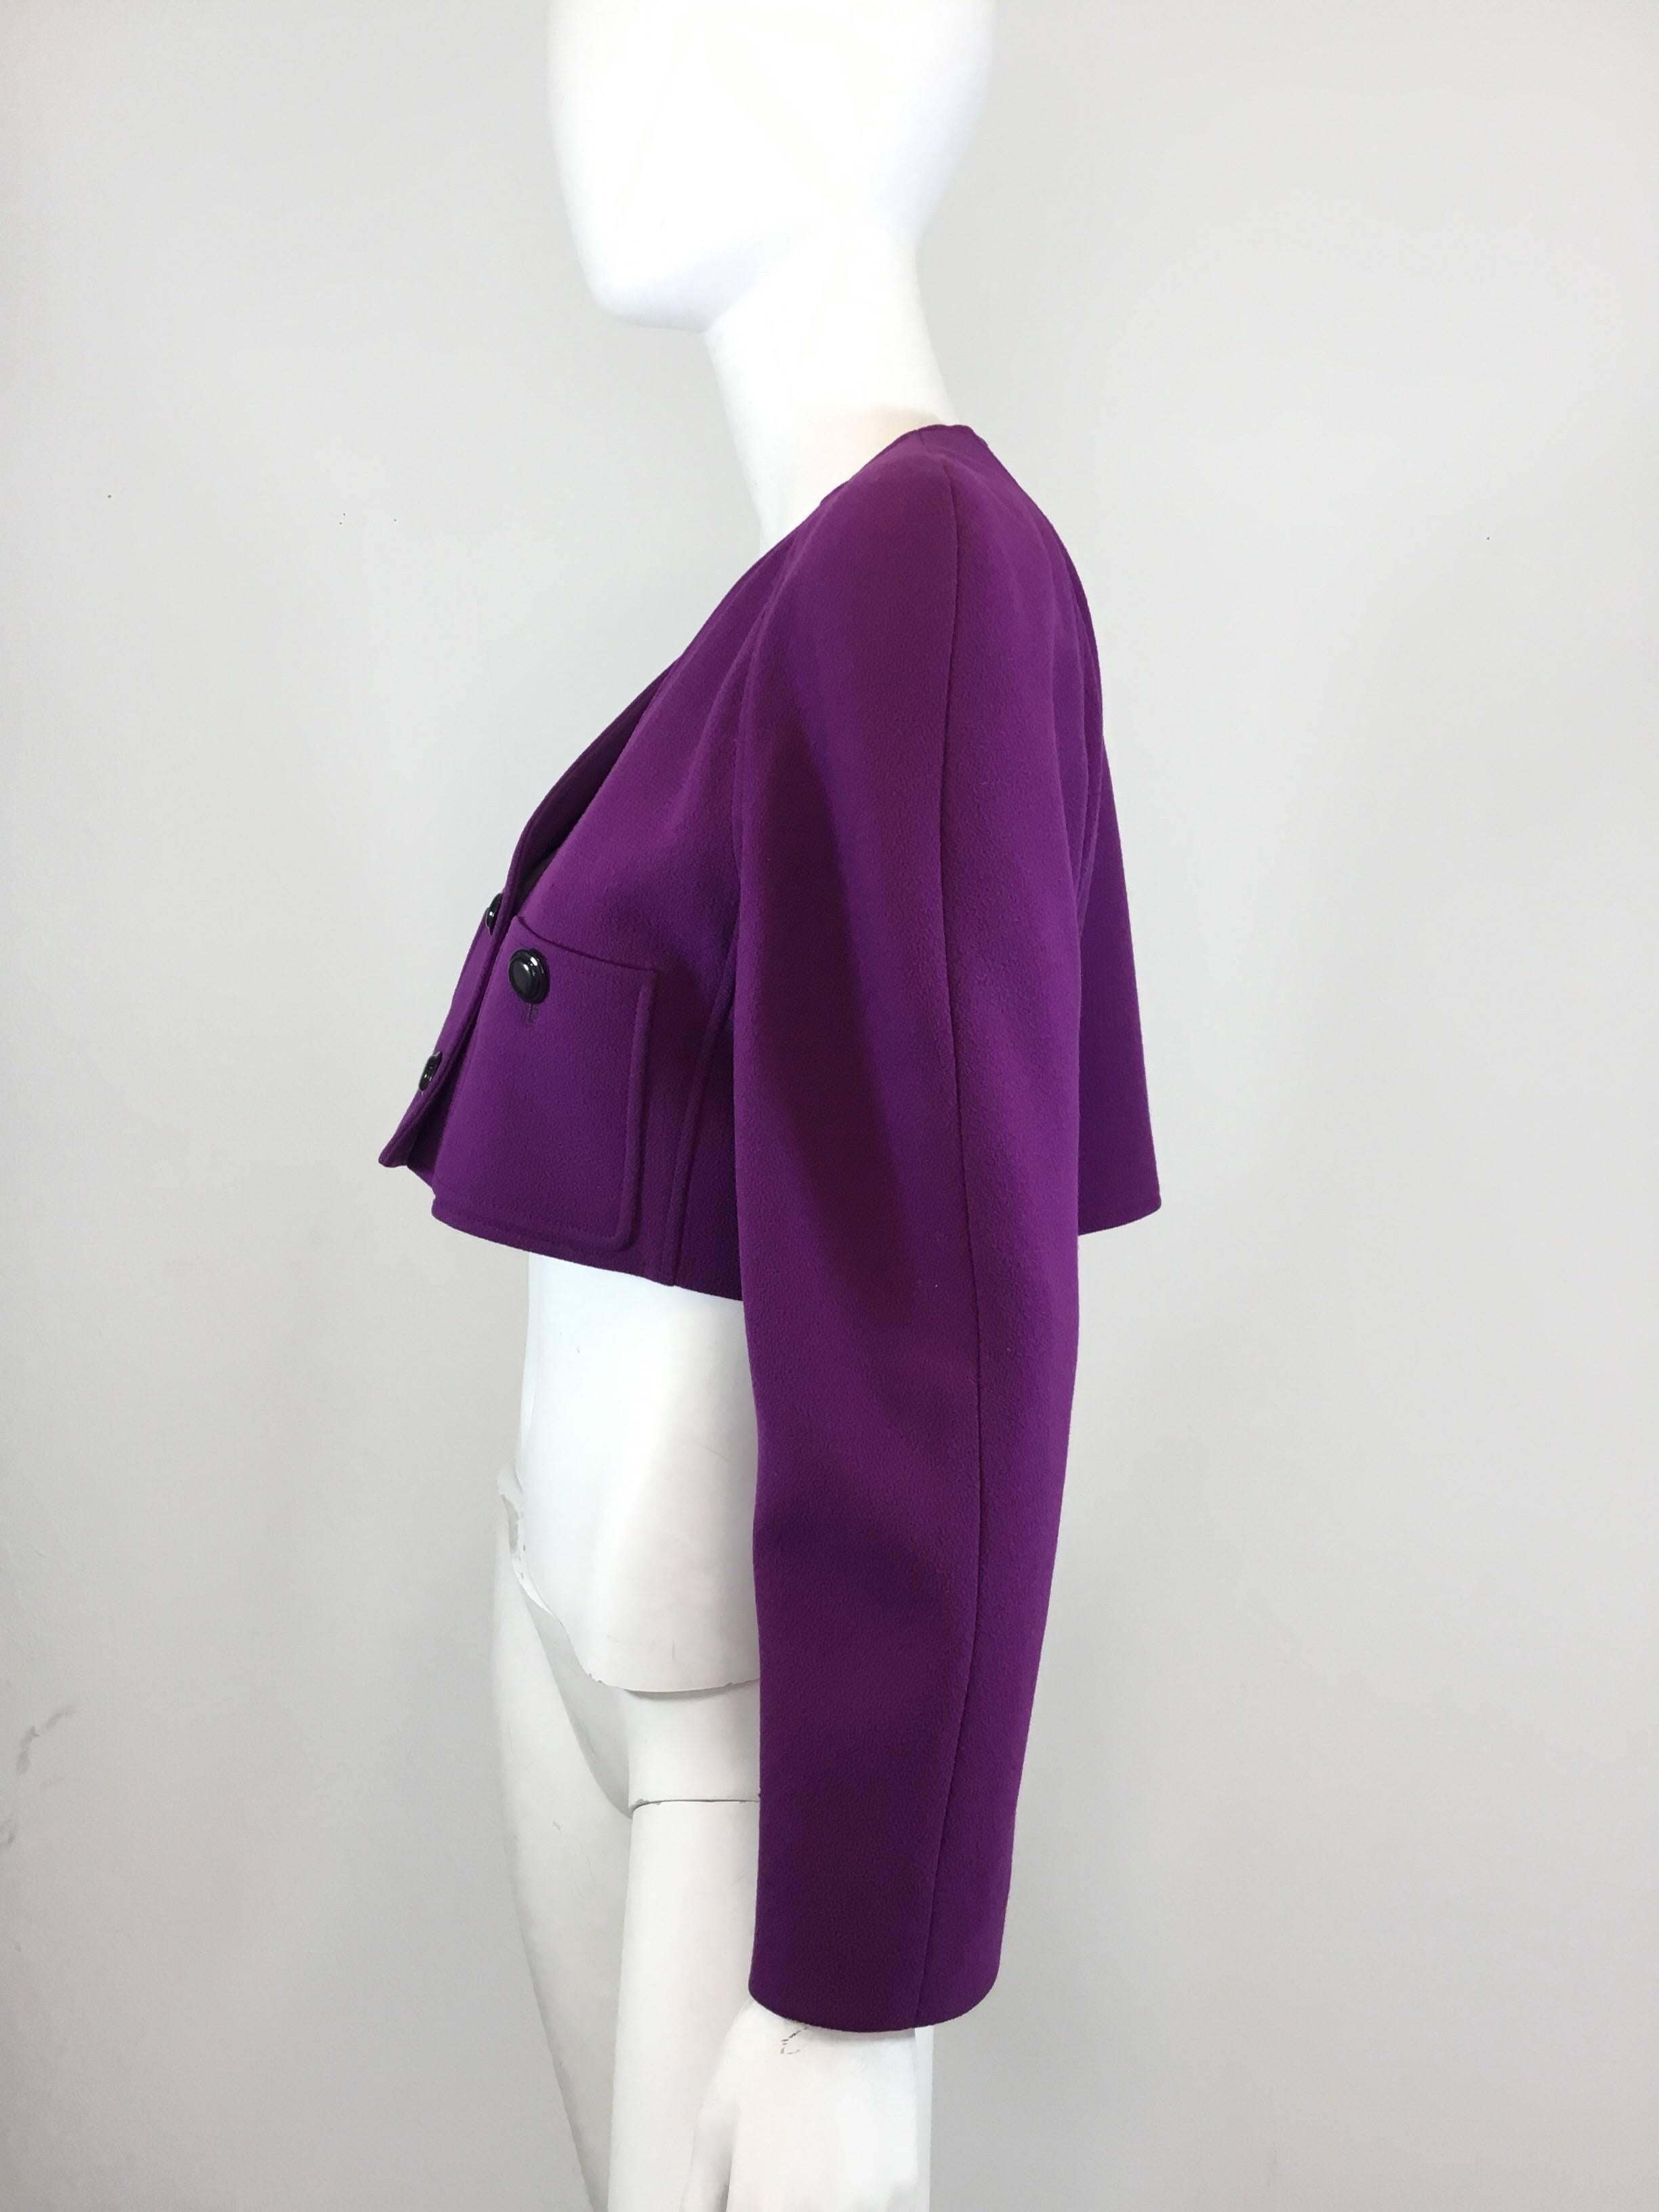 Valentino cropped jacket featured in purple wool crepe has two button closures along with two buttoned pockets at the bust. Jacket is labeled a size 8, and fully lined. Jacket has a small hole at the front of the left sleeve.

Measurements:
bust